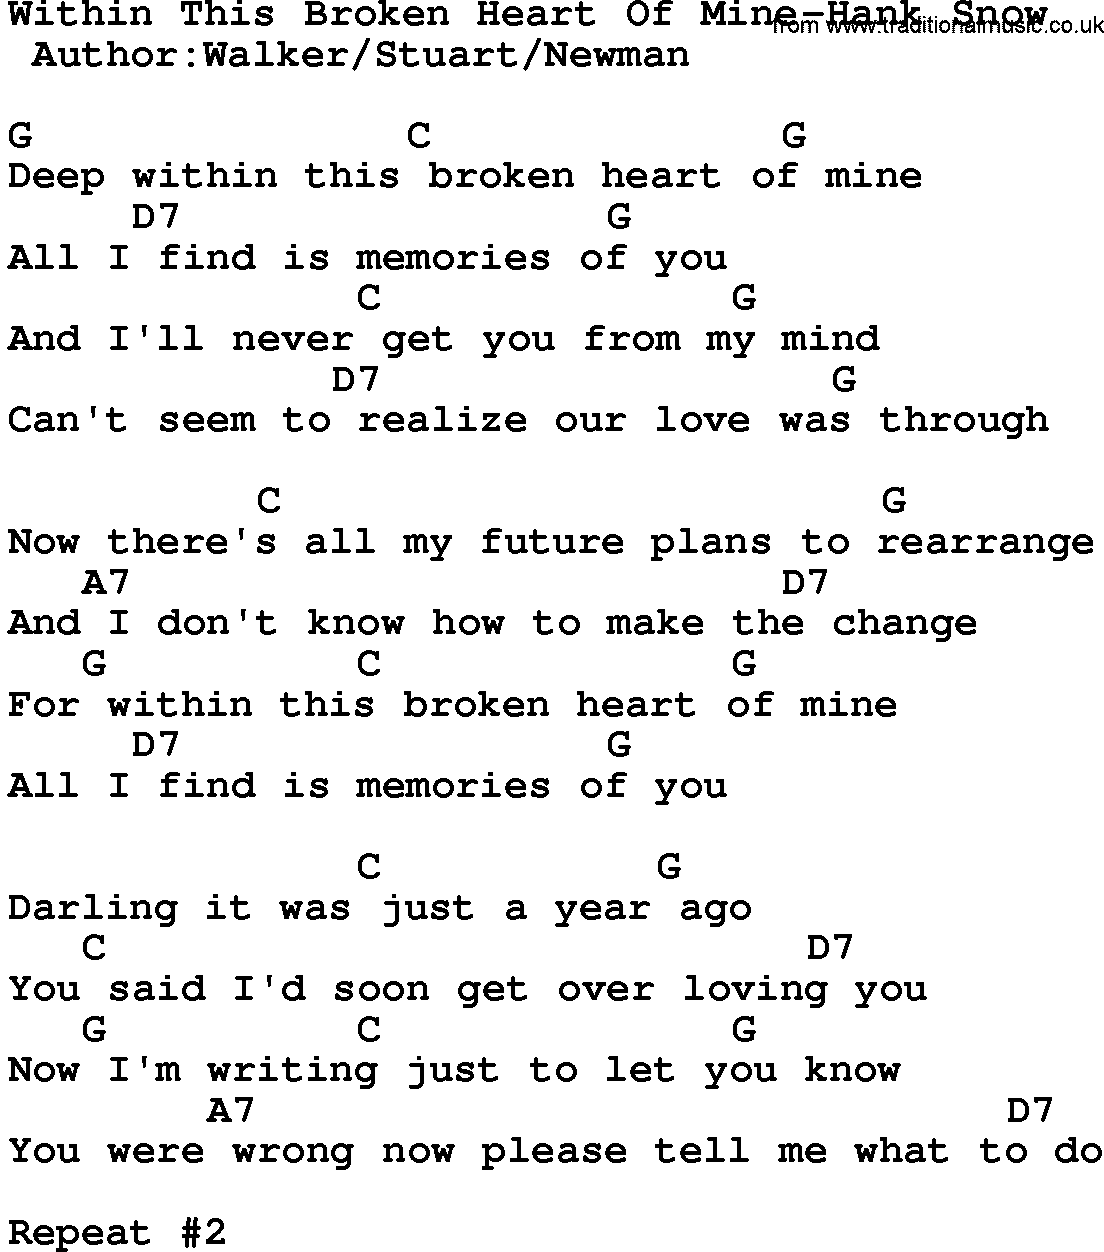 Country music song: Within This Broken Heart Of Mine-Hank Snow lyrics and chords